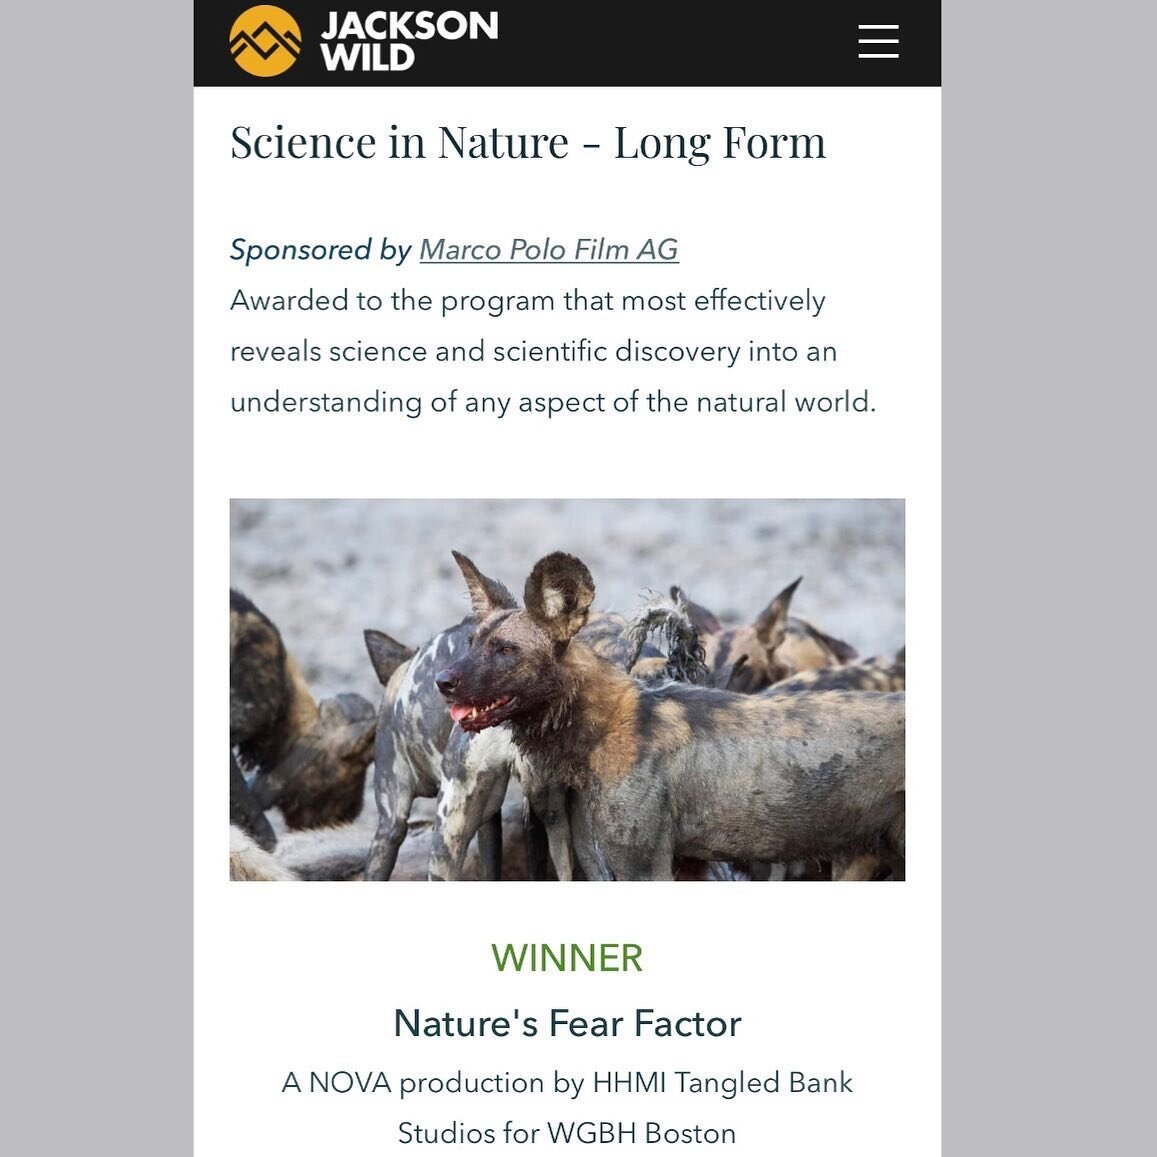 Last night our film, Nature&rsquo;s Fear Factor, won at Jackson Wild Film Festival for best Science in Nature documentary. Congrats to the whole team at @tangledbankhhmi and @novapbs, I&rsquo;m feeling pretty grateful to continue to tell the story of